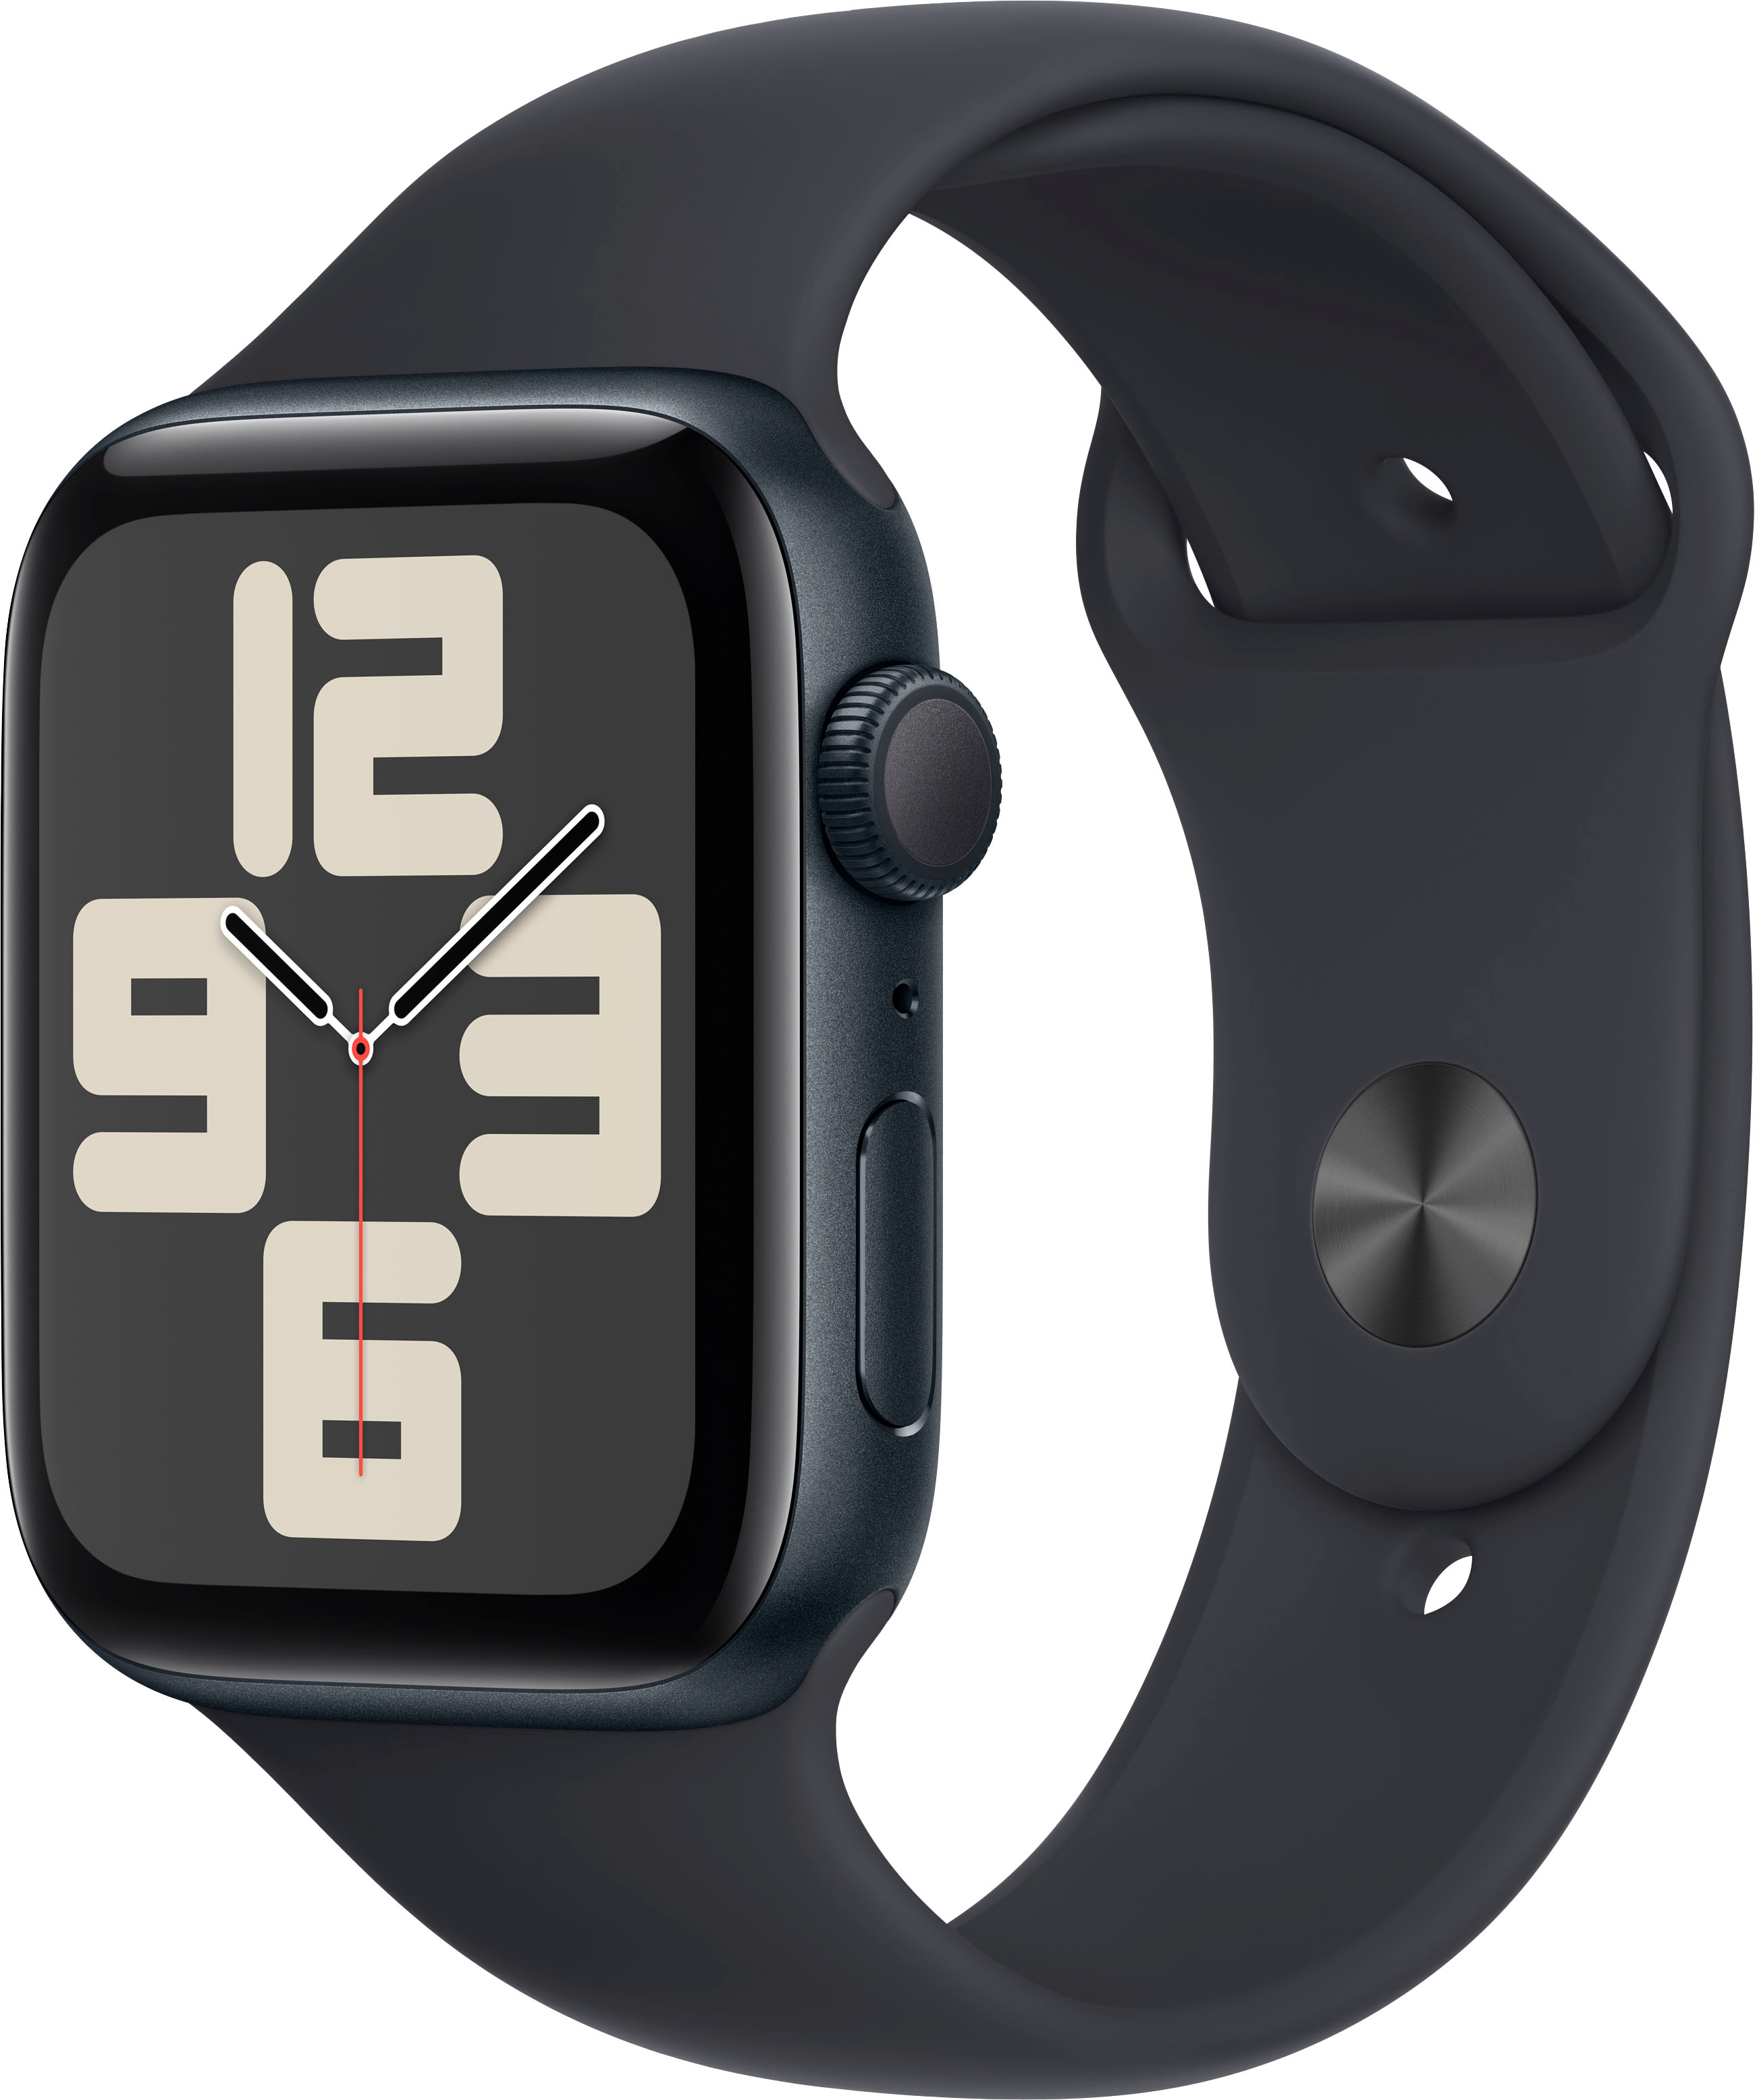 Apple Watch Series 5 for sale